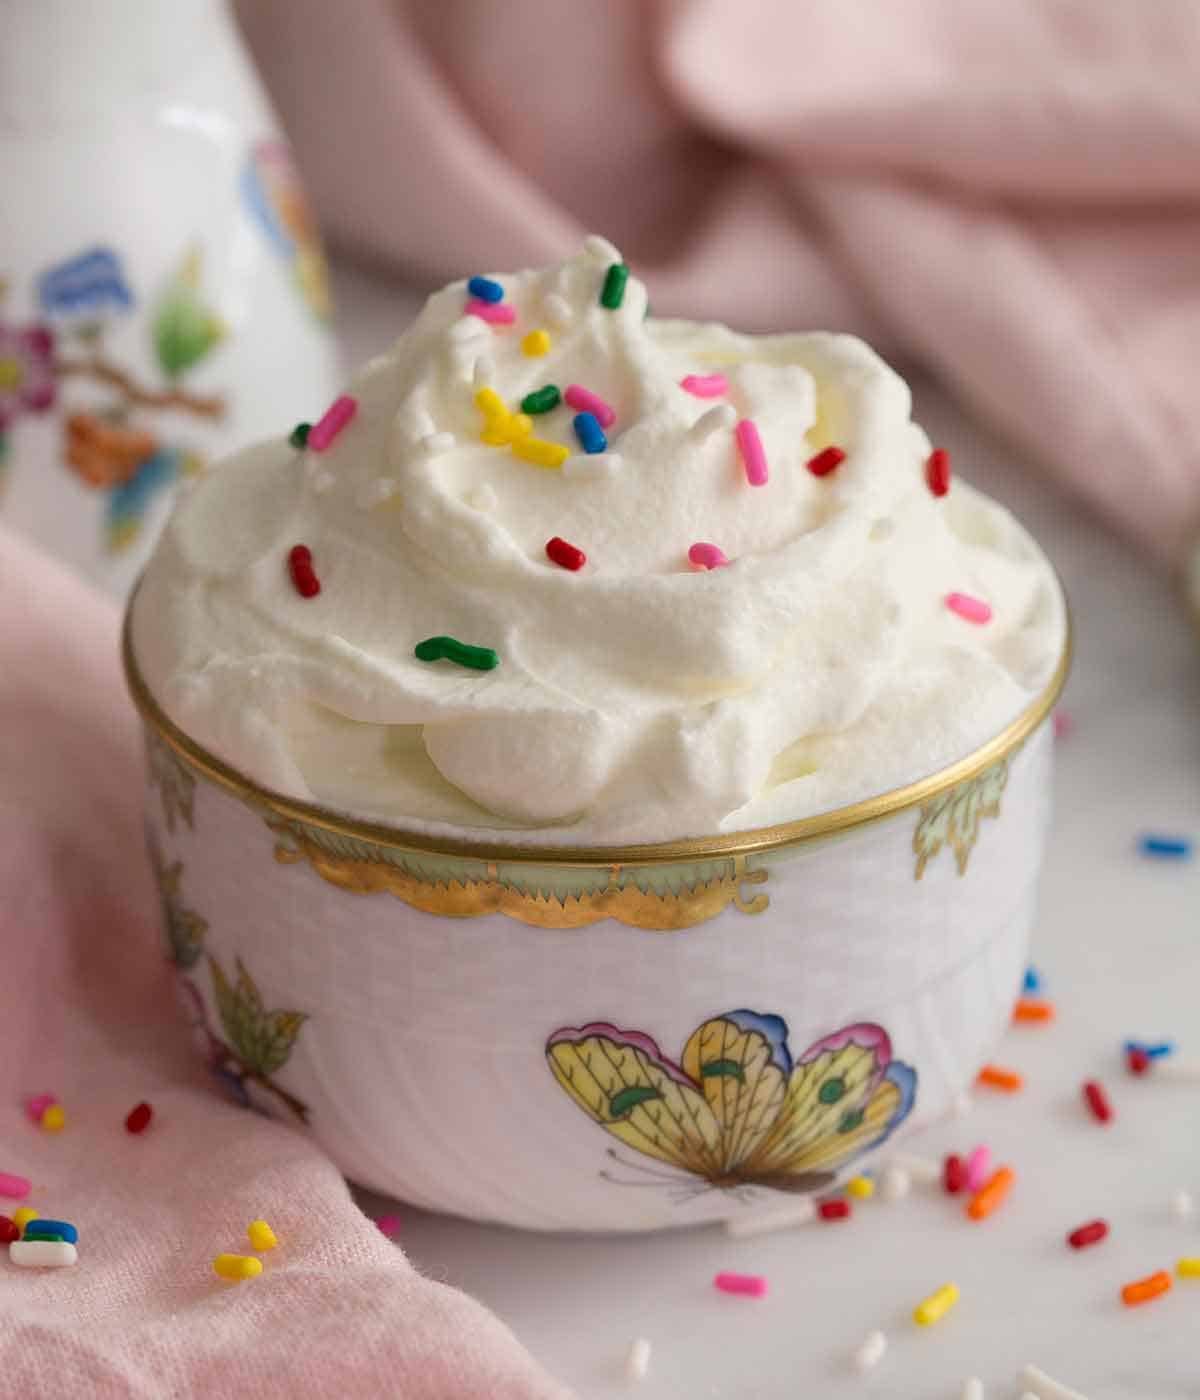 A bowl with flowers and butterflies containing whipped cream and rainbow sprinkles.